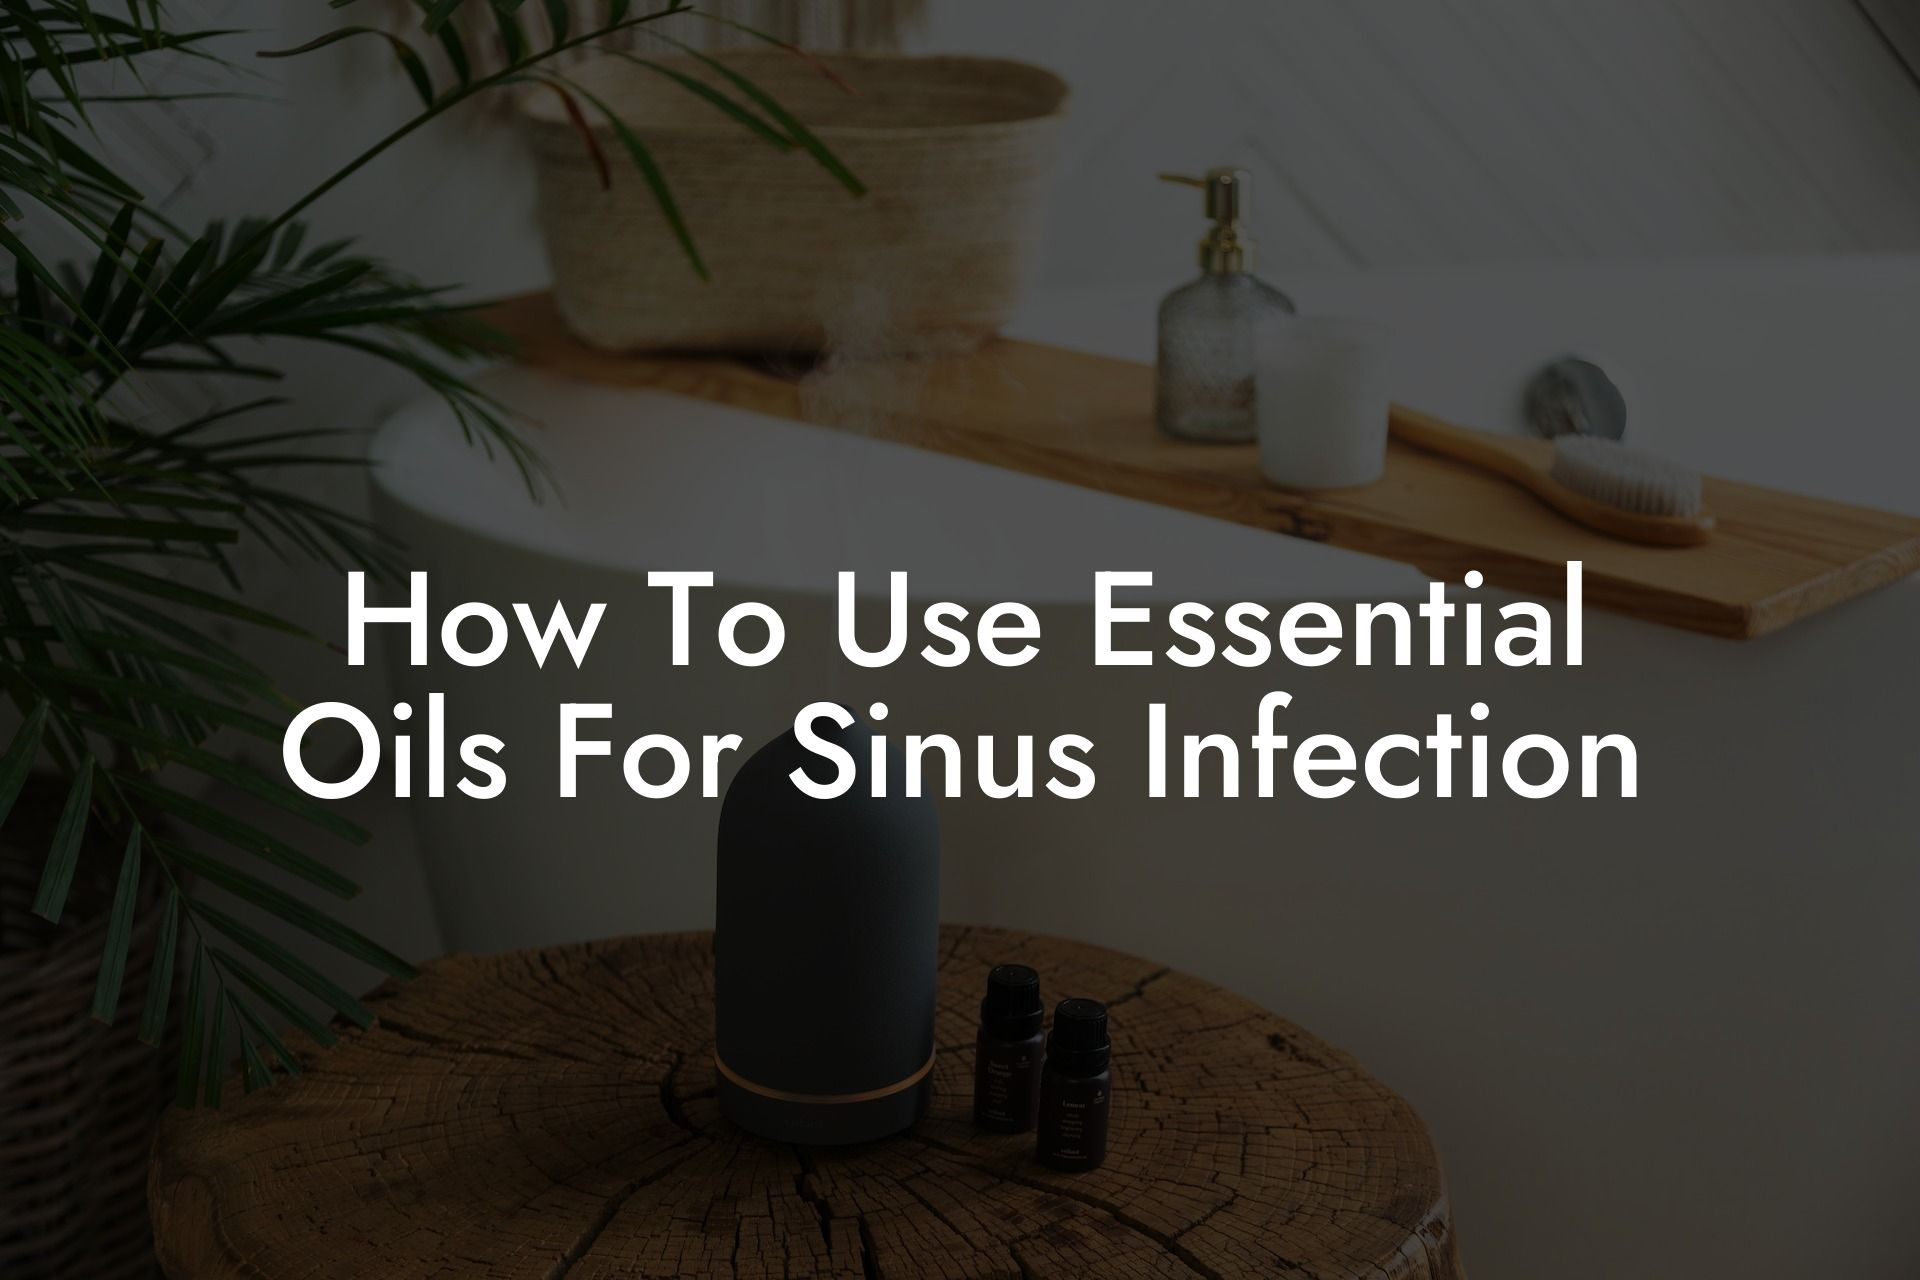 How To Use Essential Oils For Sinus Infection